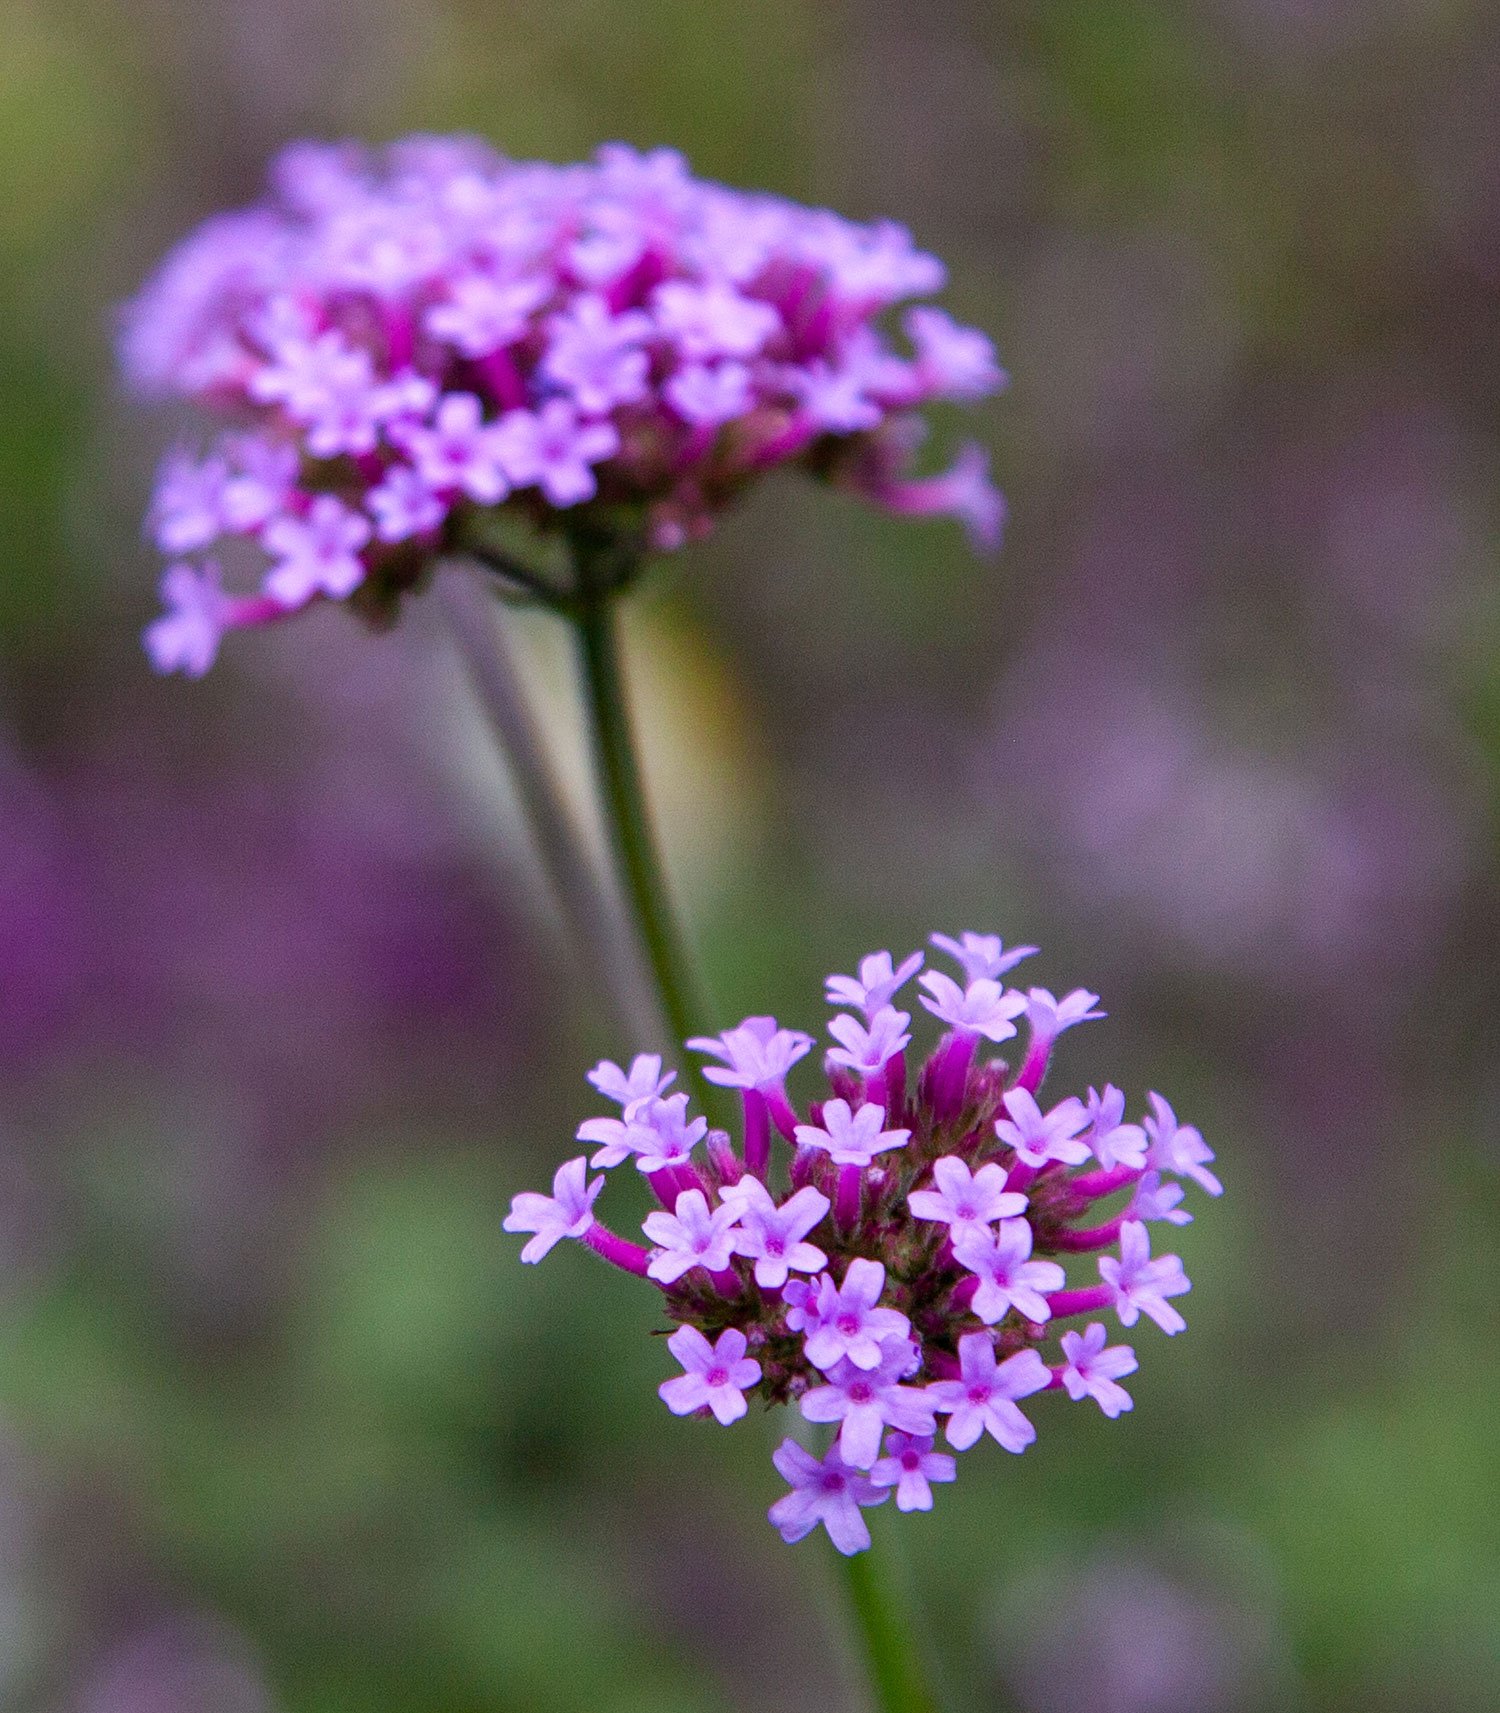 Tall Purples ( or Verbena Bonariensis) are the Featured Flower on this episode of Life in Bloom!